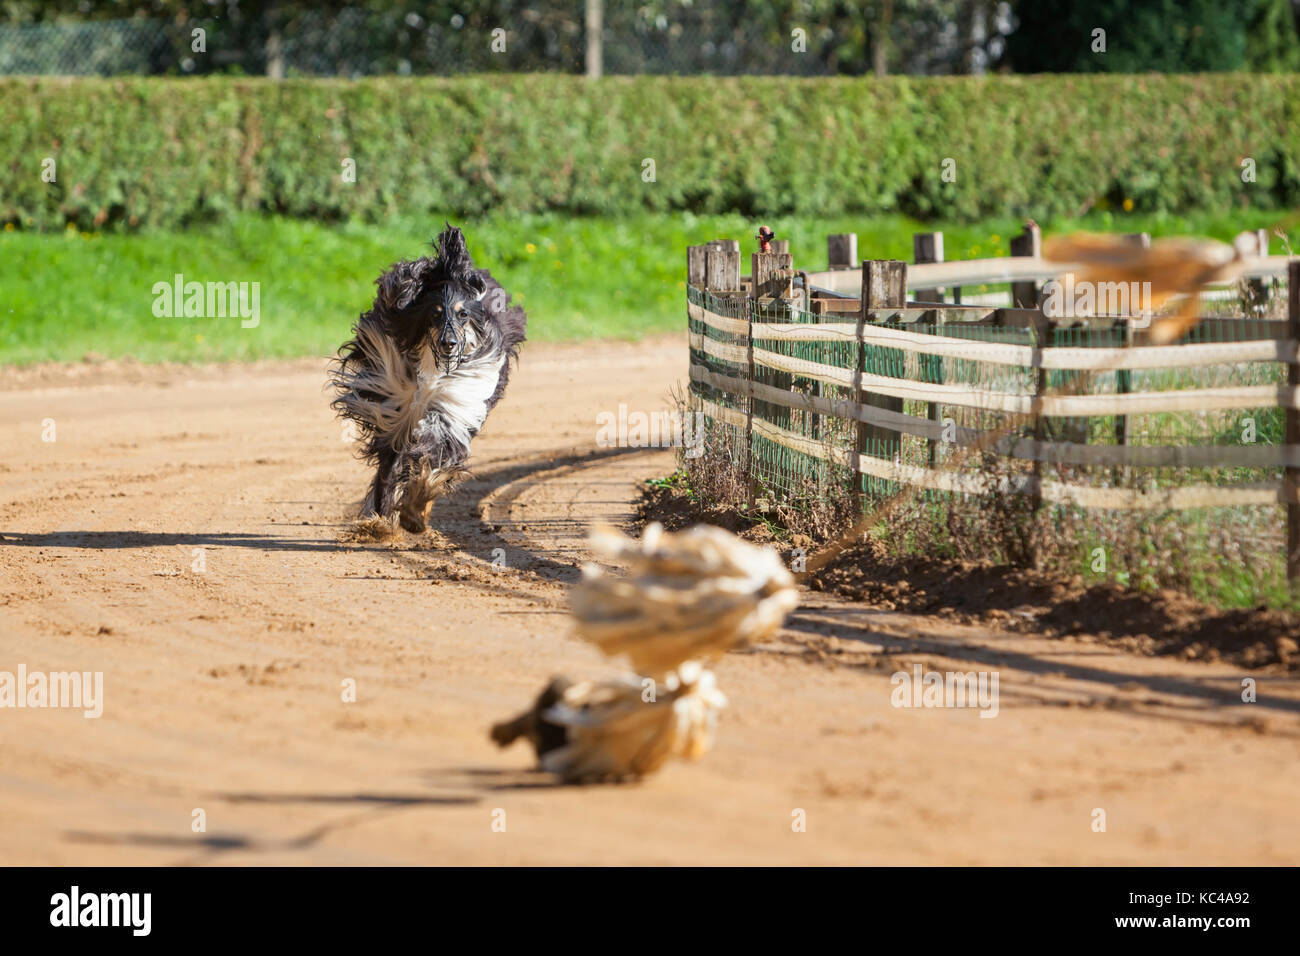 Black and tan coloured Afghan sighthound following the lure in training on race track Stock Photo